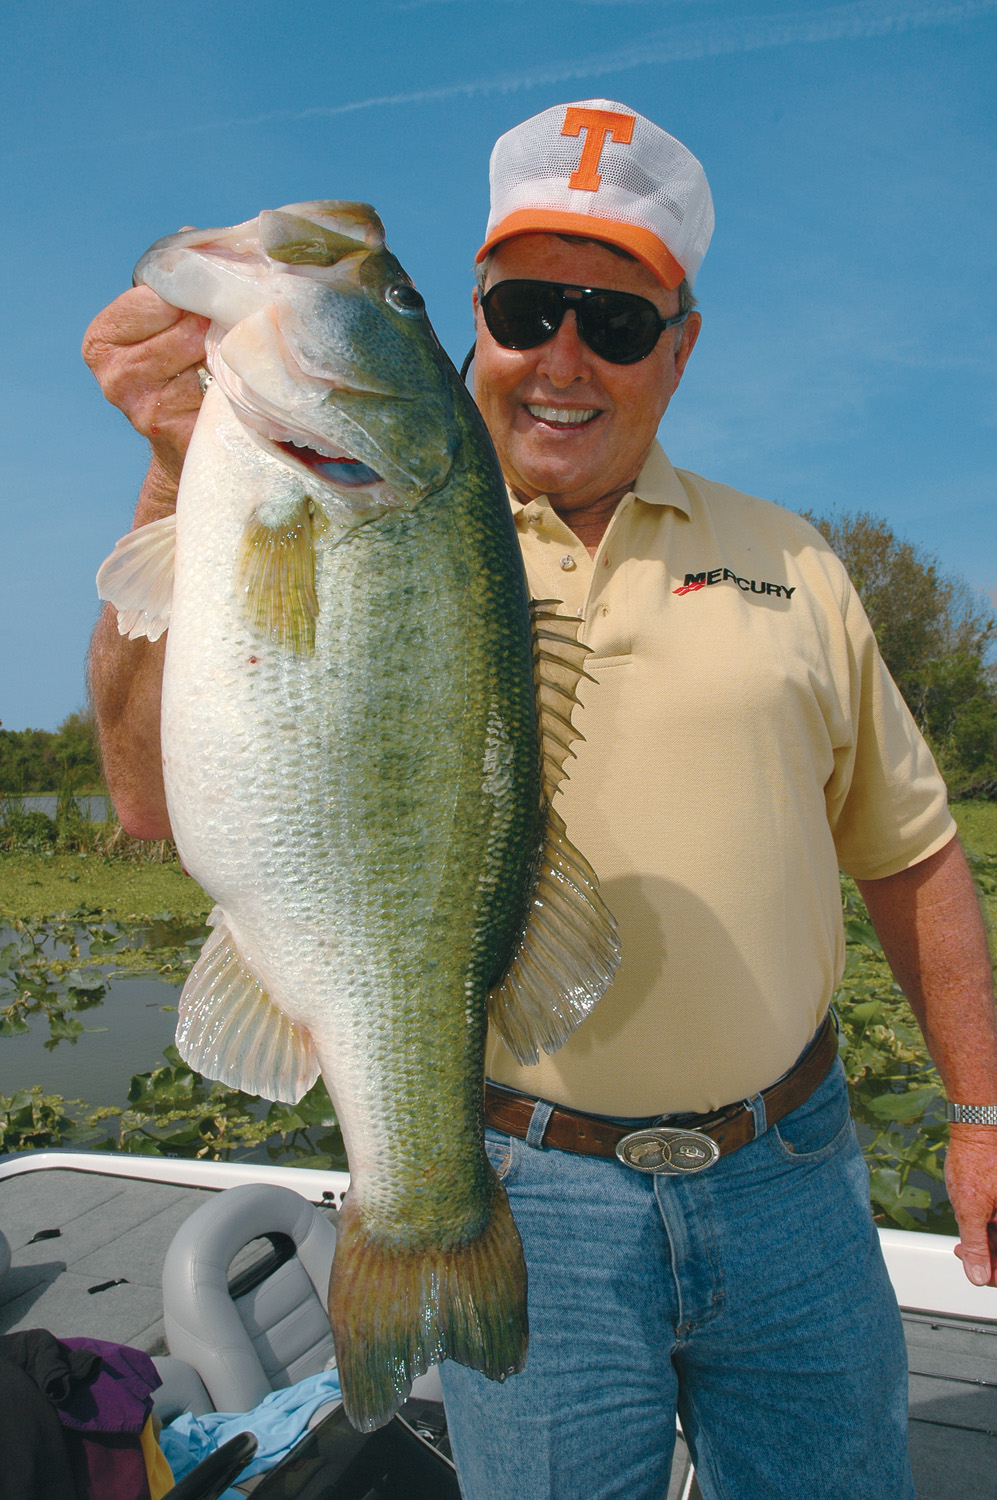 Dance' Lands The Biggest Catch Of His Fishing Career Sam Venable